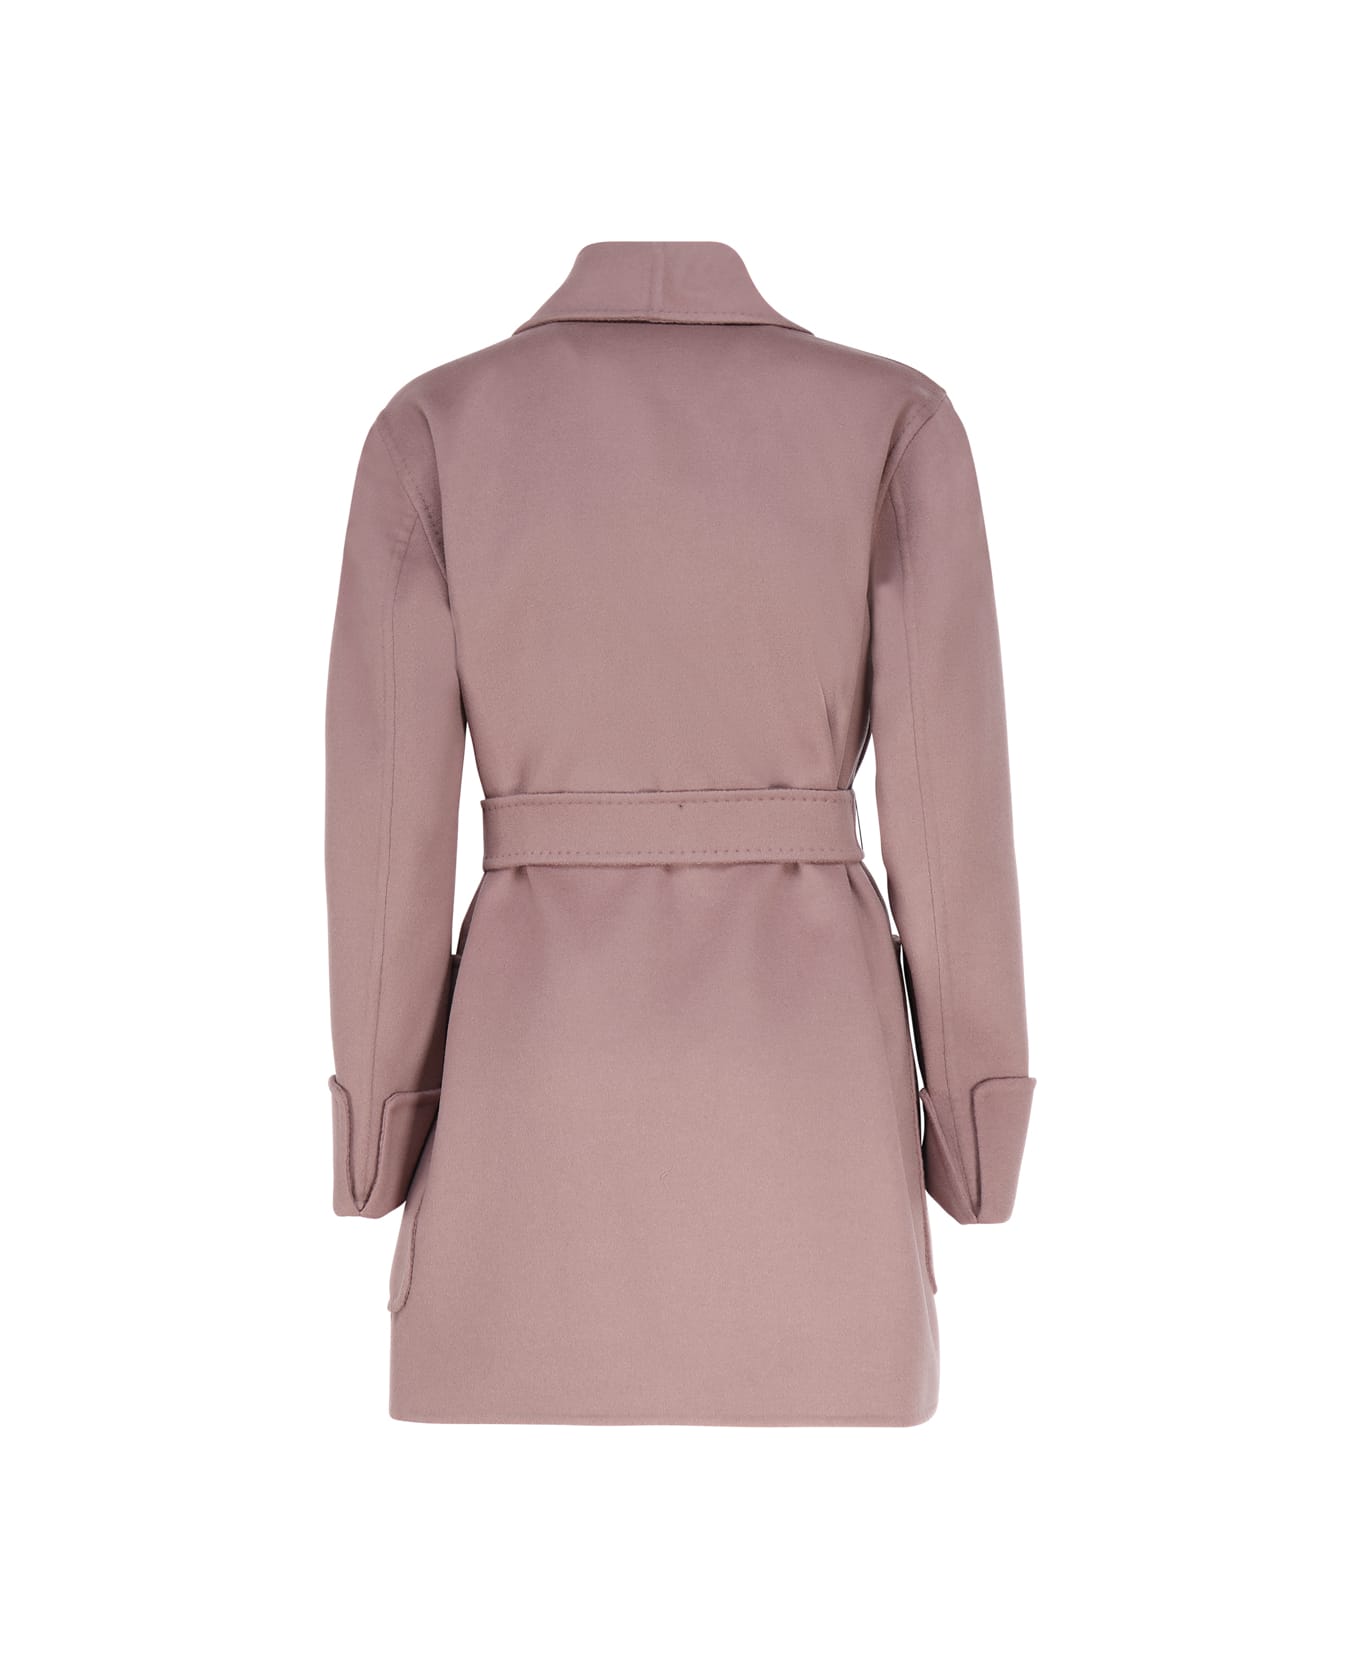 Max Mara Deconstructed Jacket In Wool And Cashmere - Pink